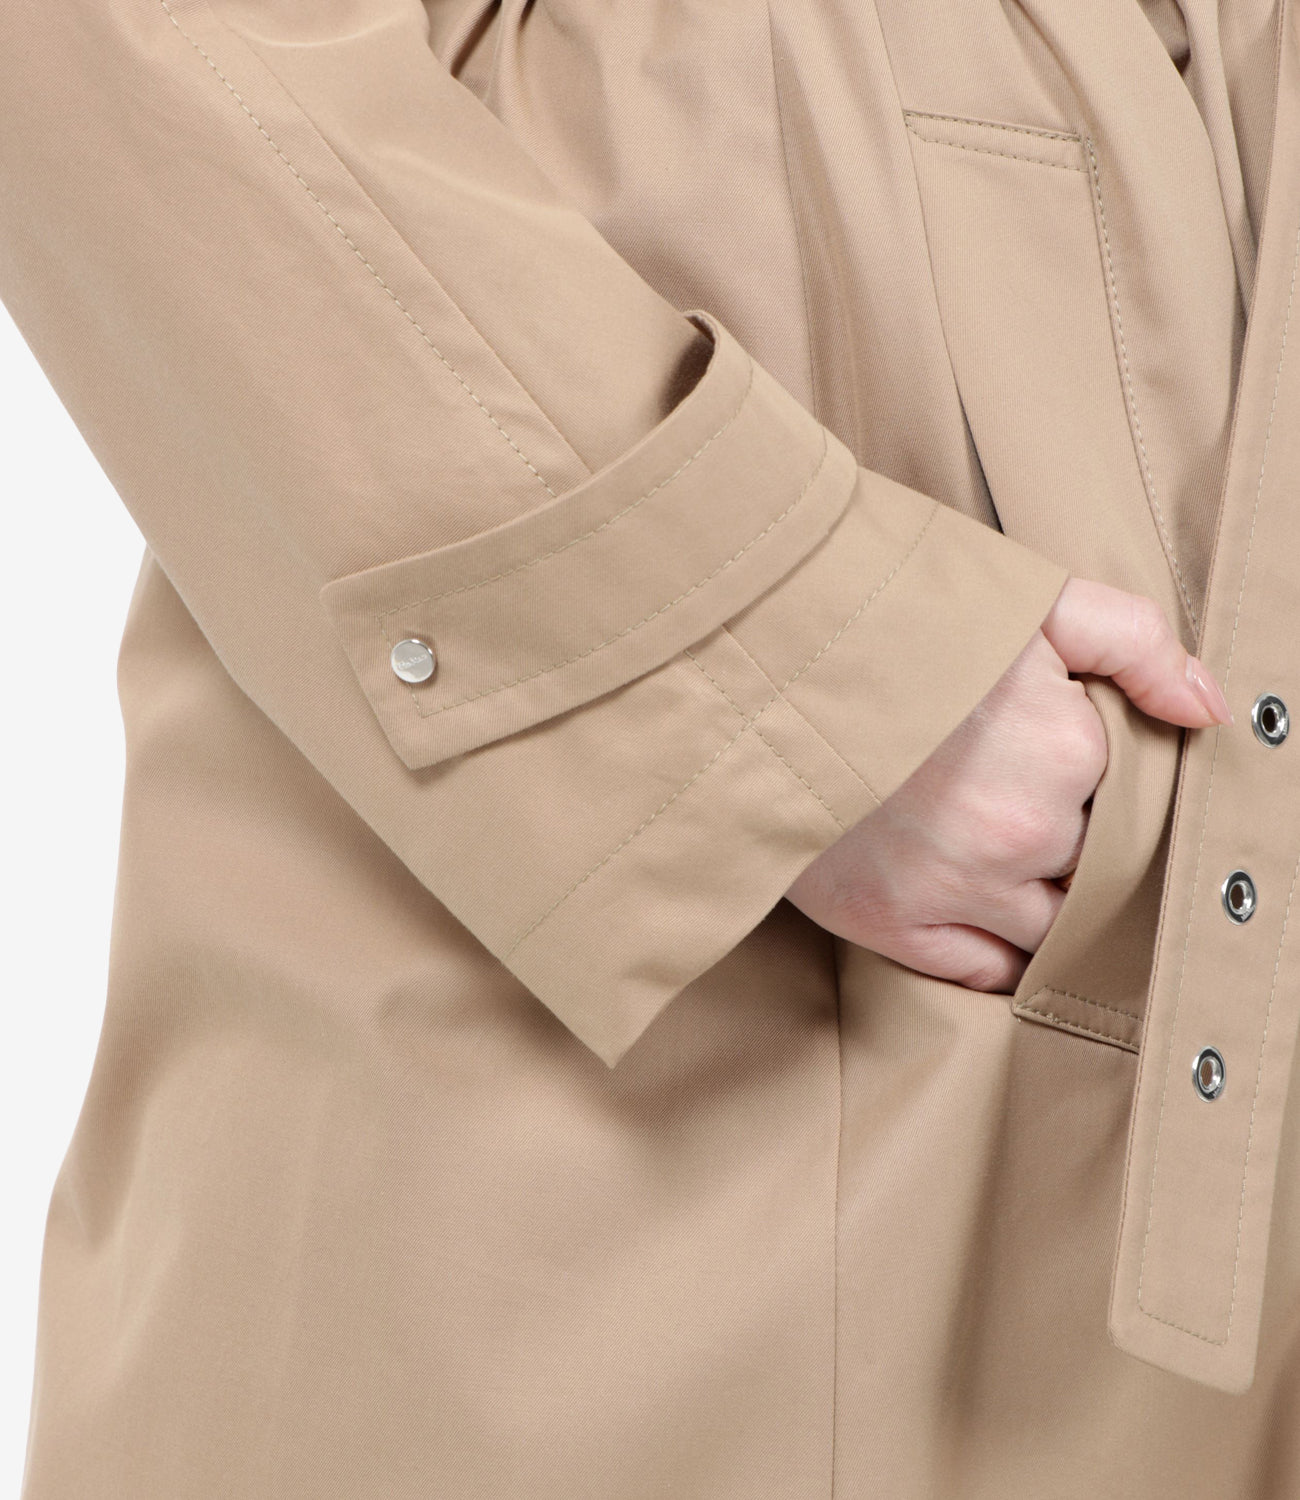 Max Mara The Cube | Trench Etrench Cammello